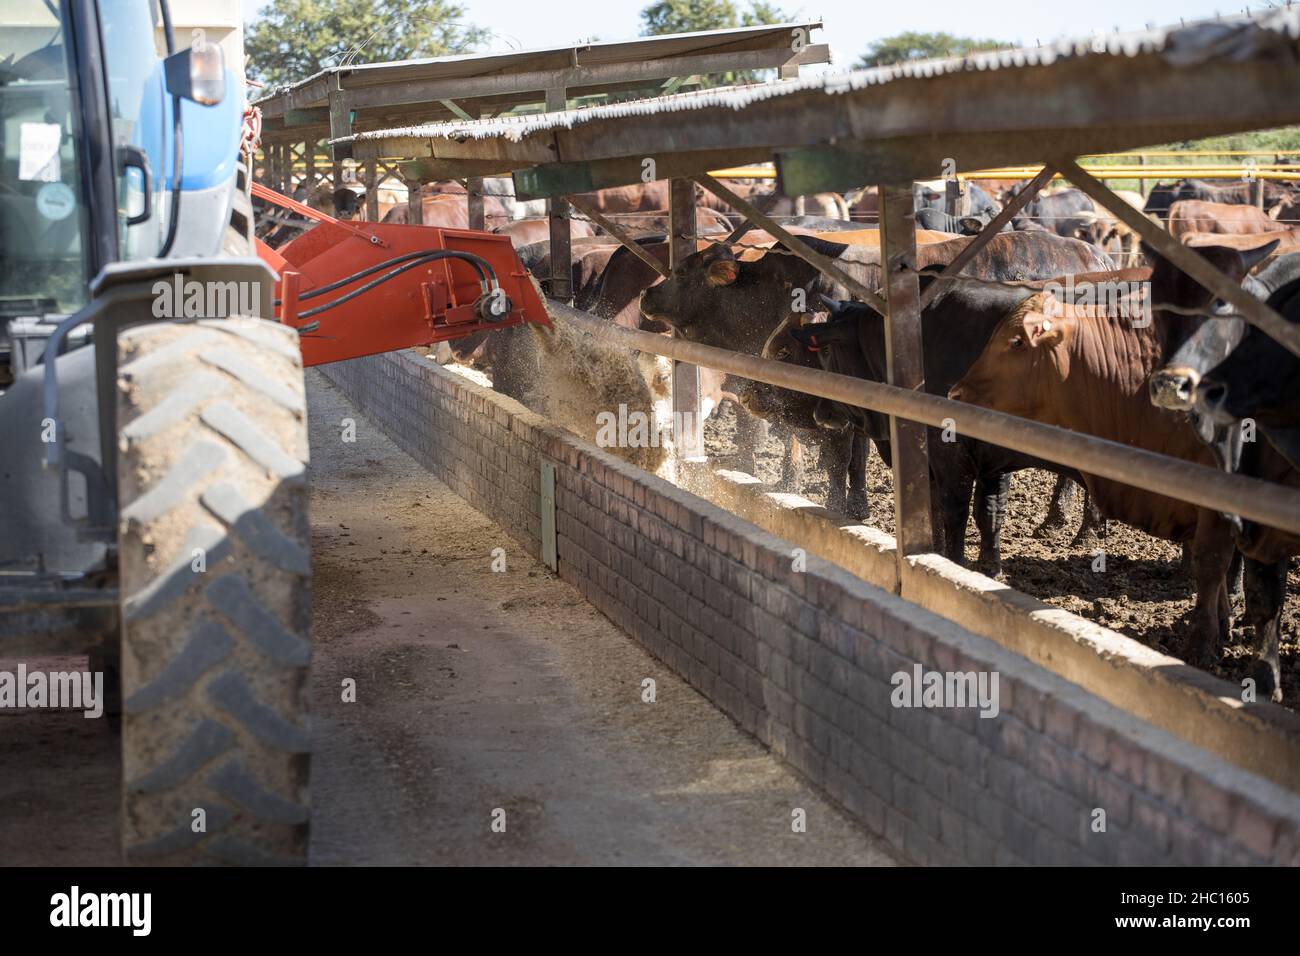 Feed truck delivering food to feeding cattle in a feedlot or feed yard Stock Photo